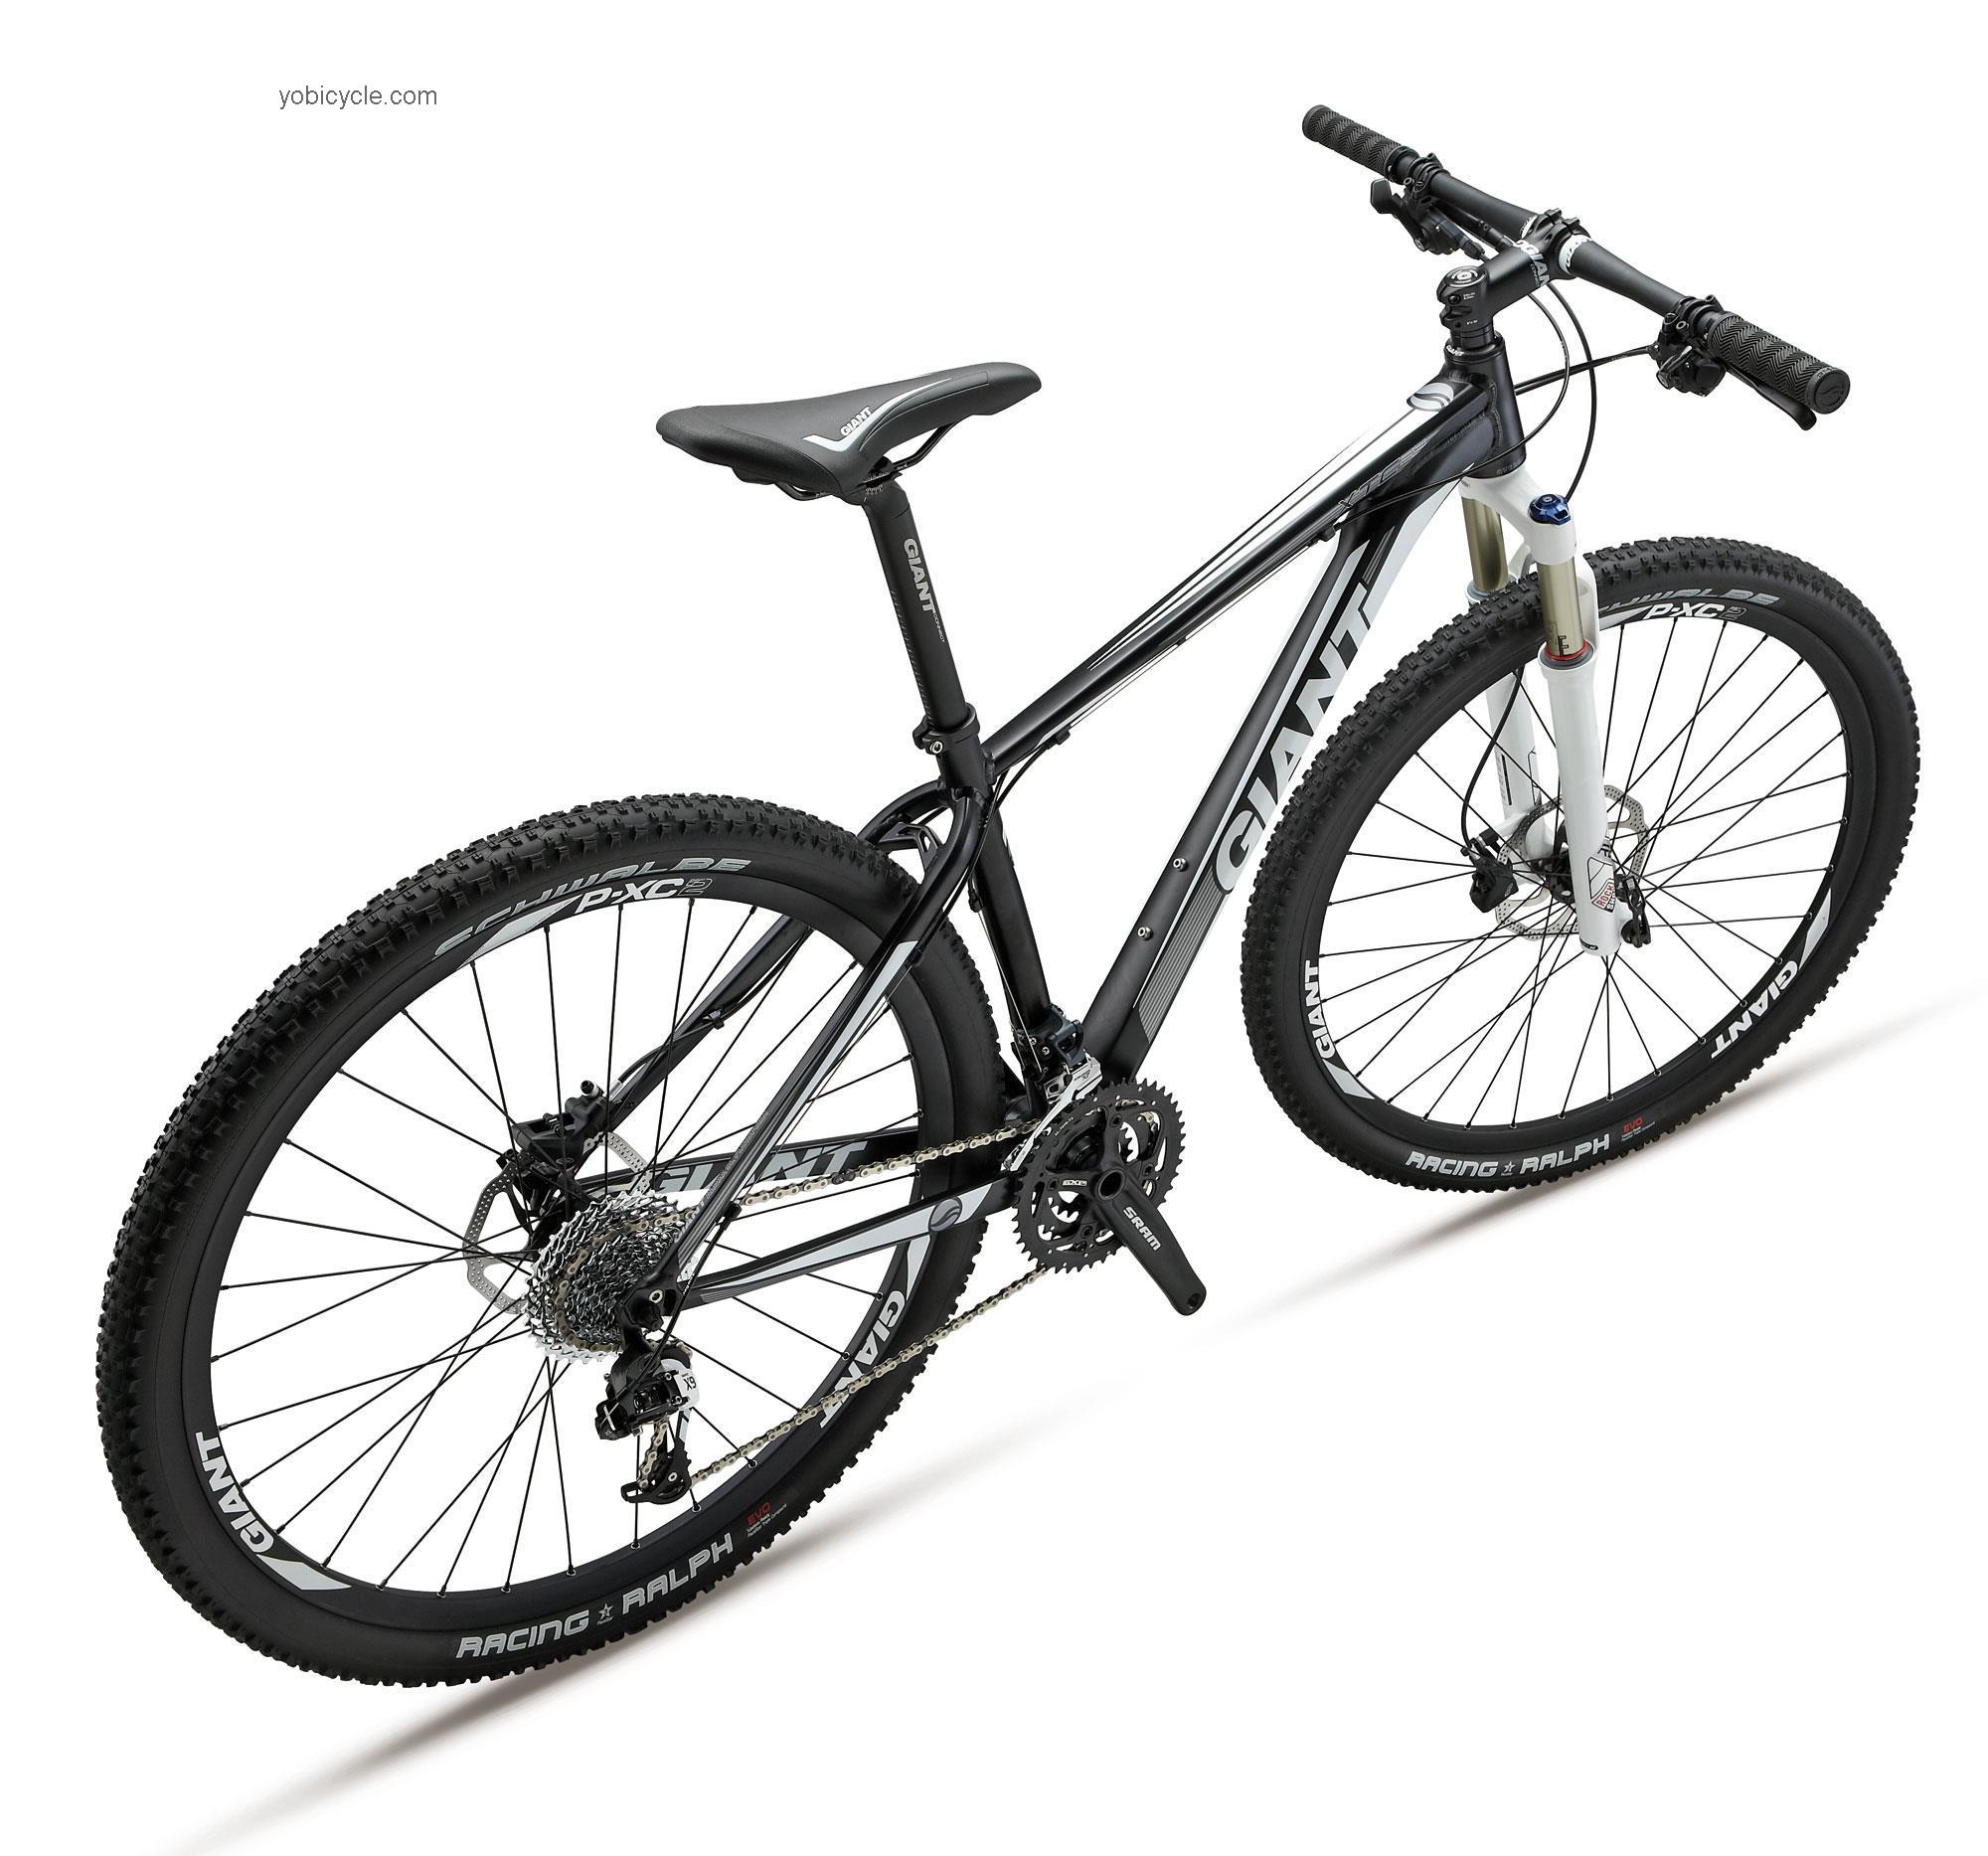 Giant XTC 29er 1 2012 comparison online with competitors